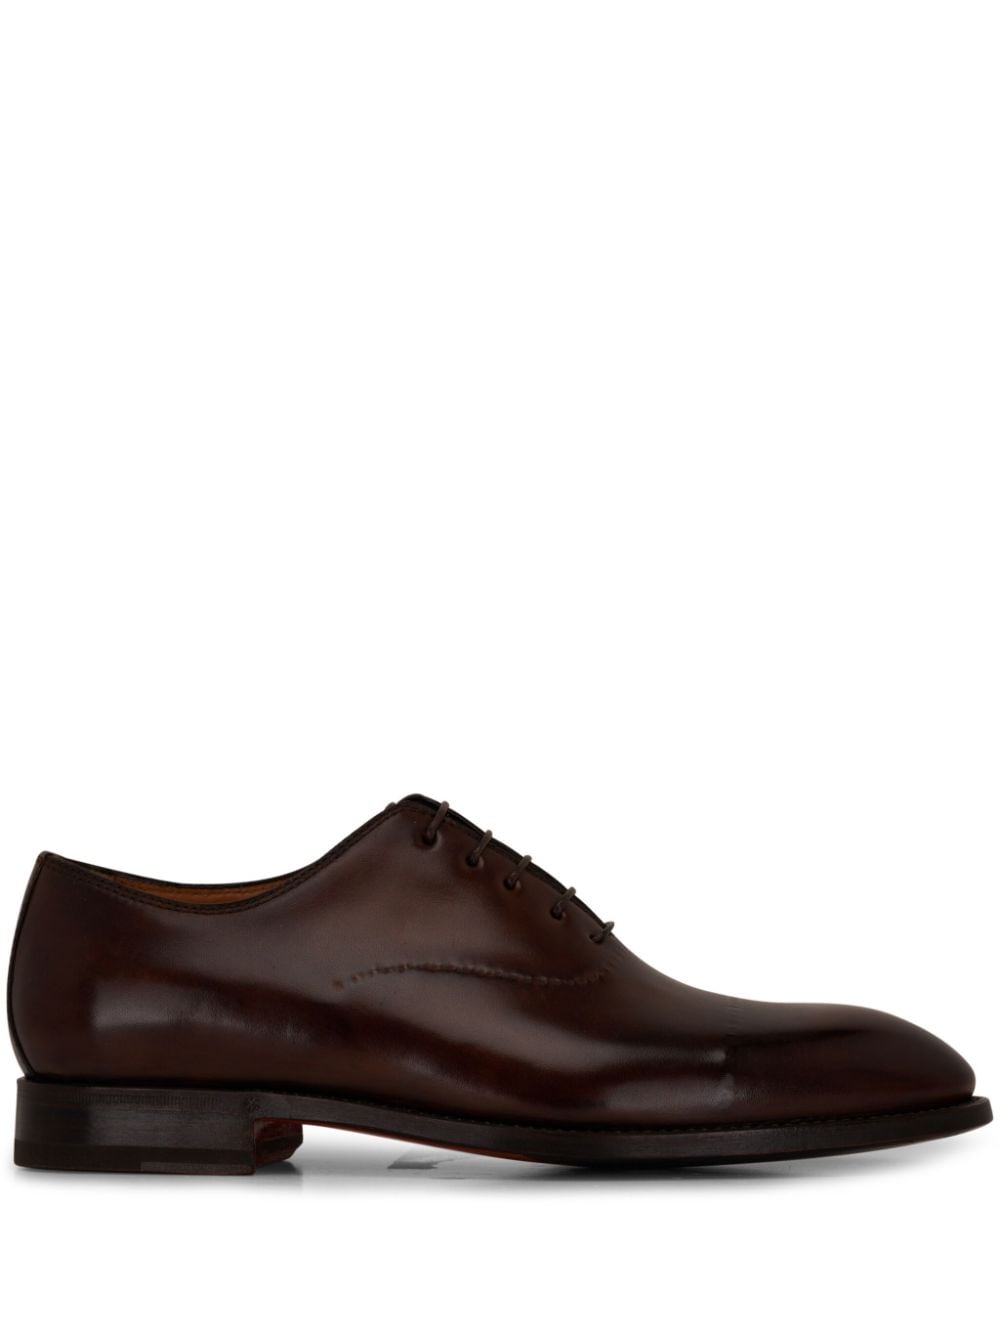 Vittorio leather Oxford shoes